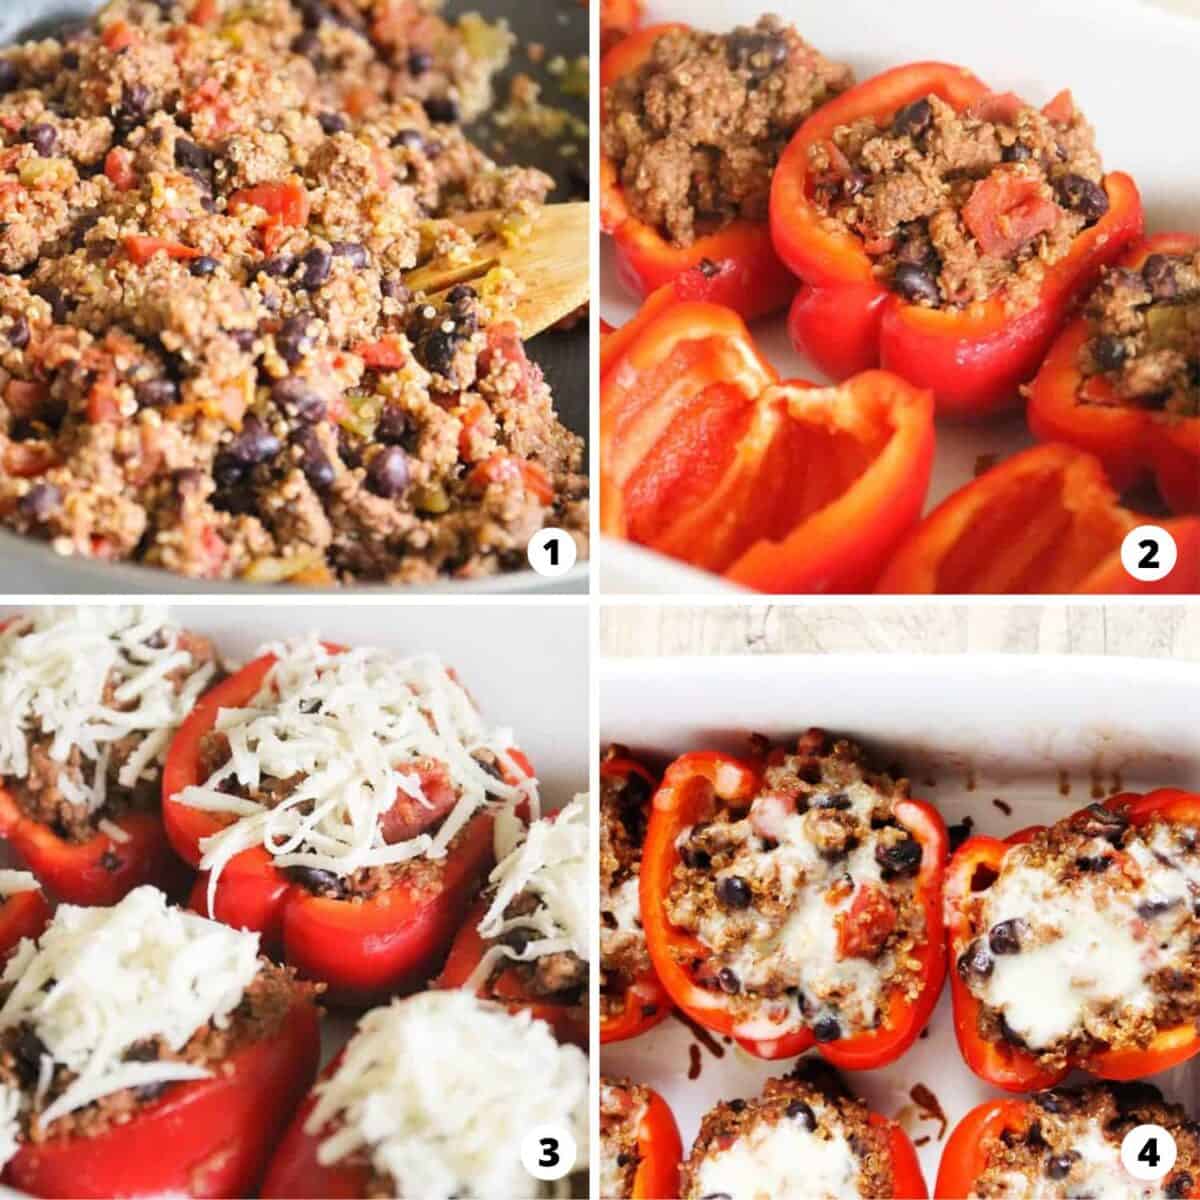 Showing how to make quinoa stuffed peppers in a 4 step collage.